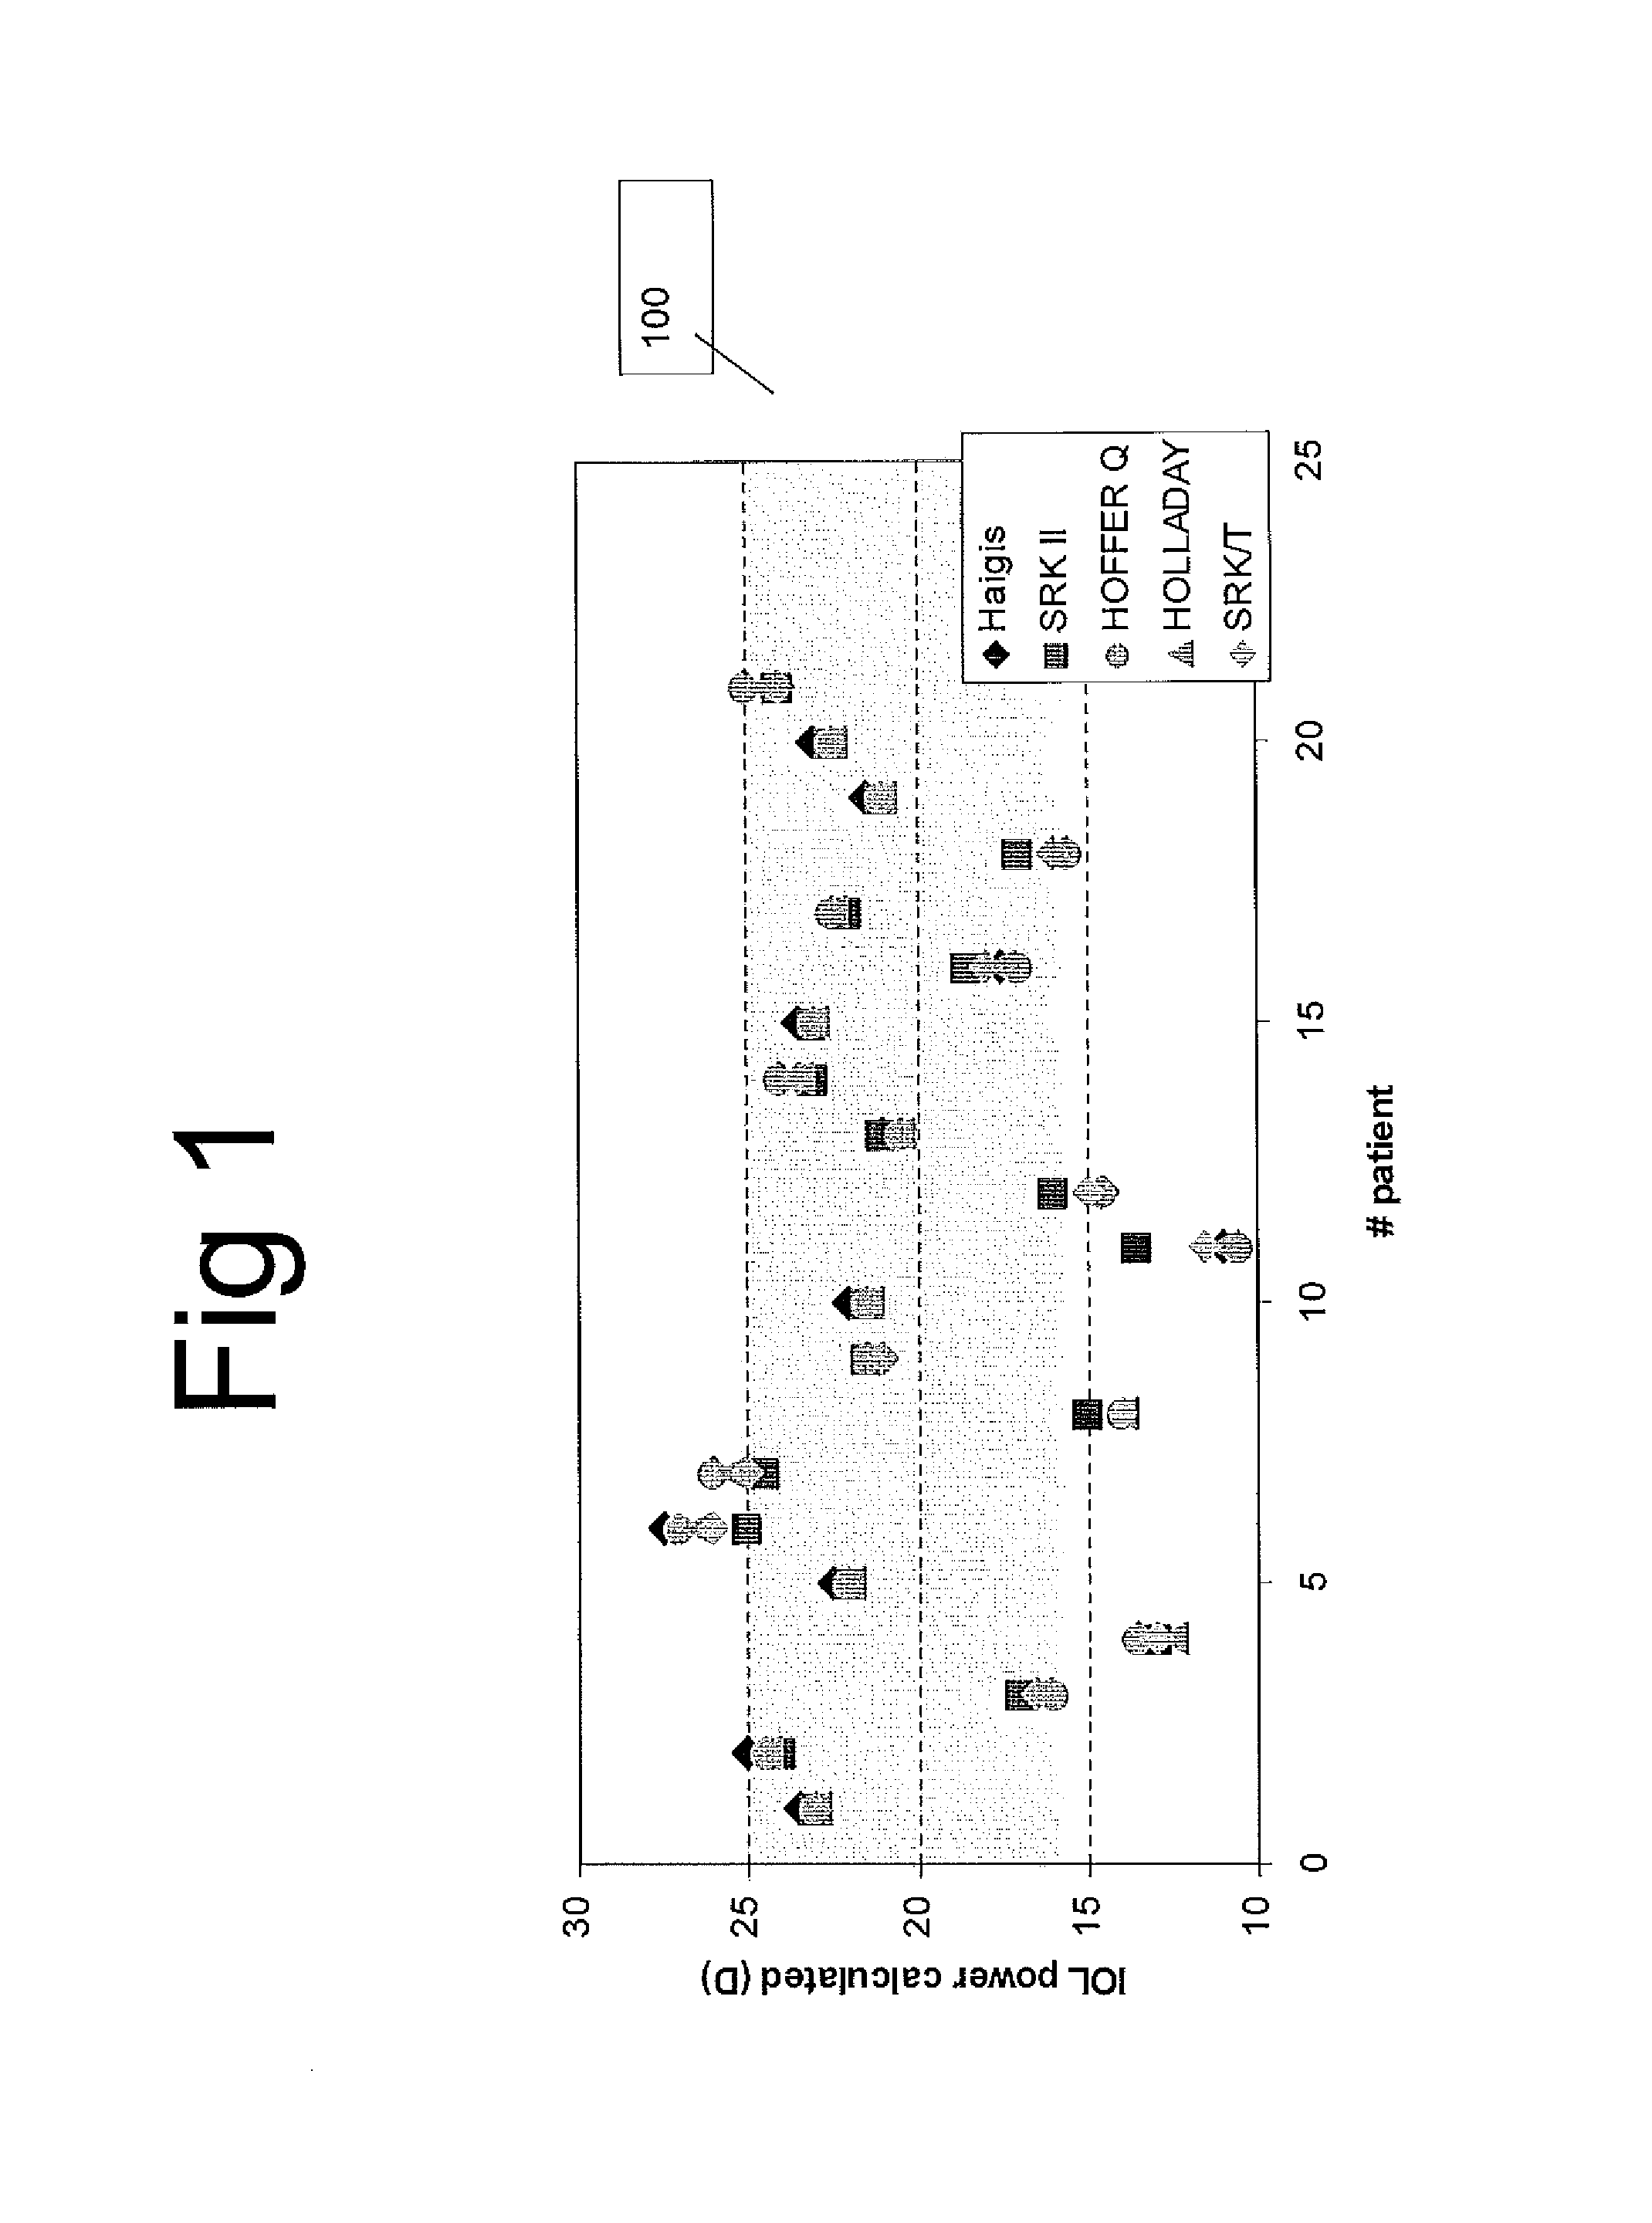 Customized intraocular lens power calculation system and method